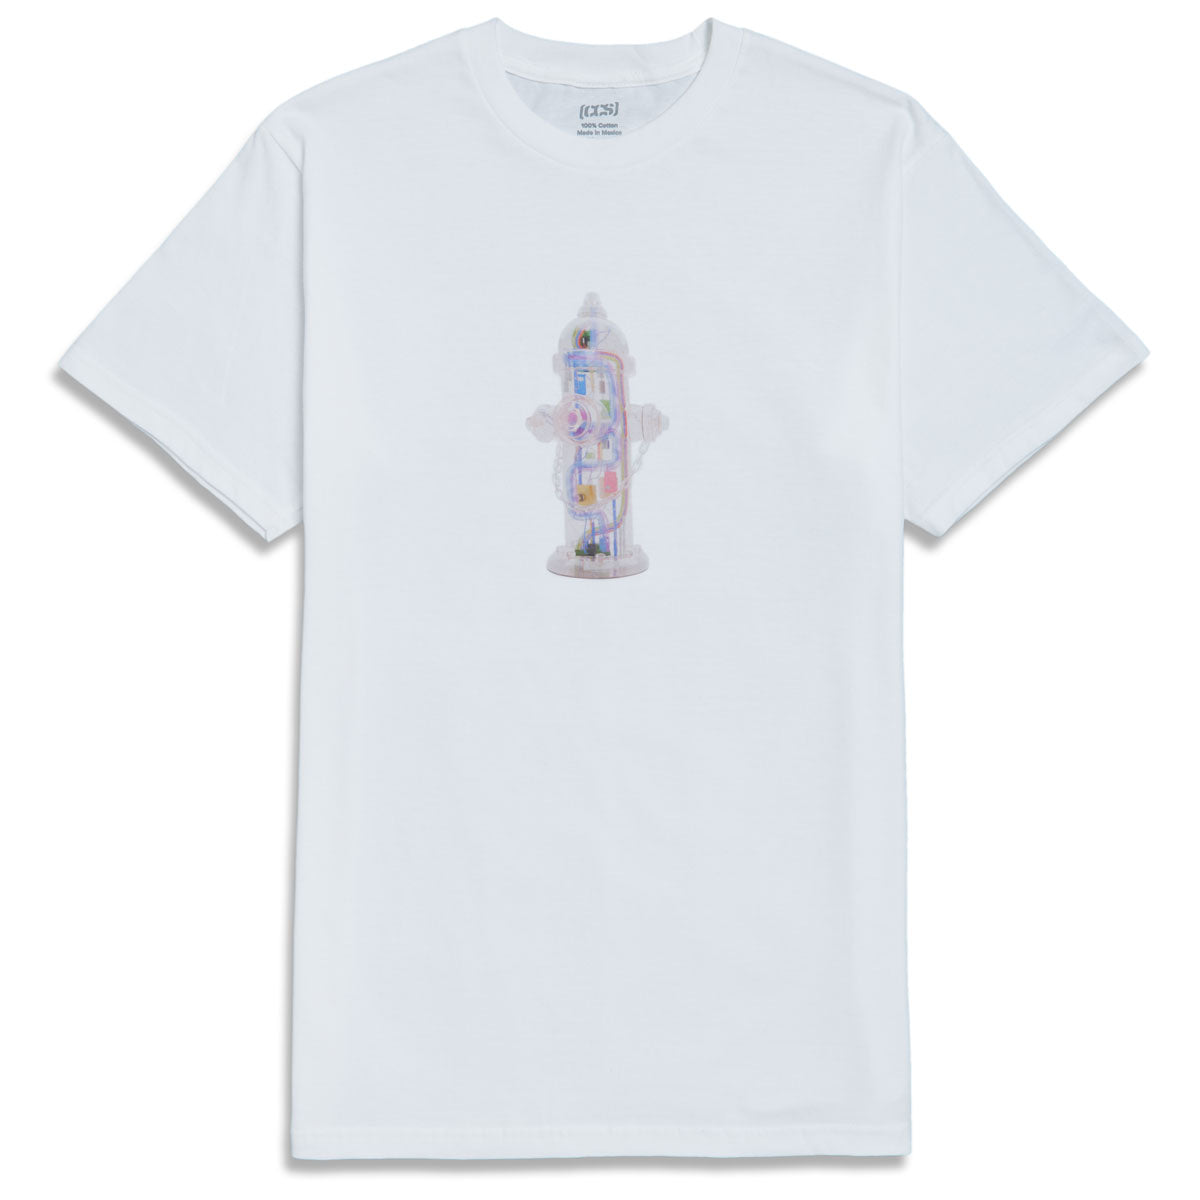 CCS Going Clear Hydrant T-Shirt - White - XL image 1